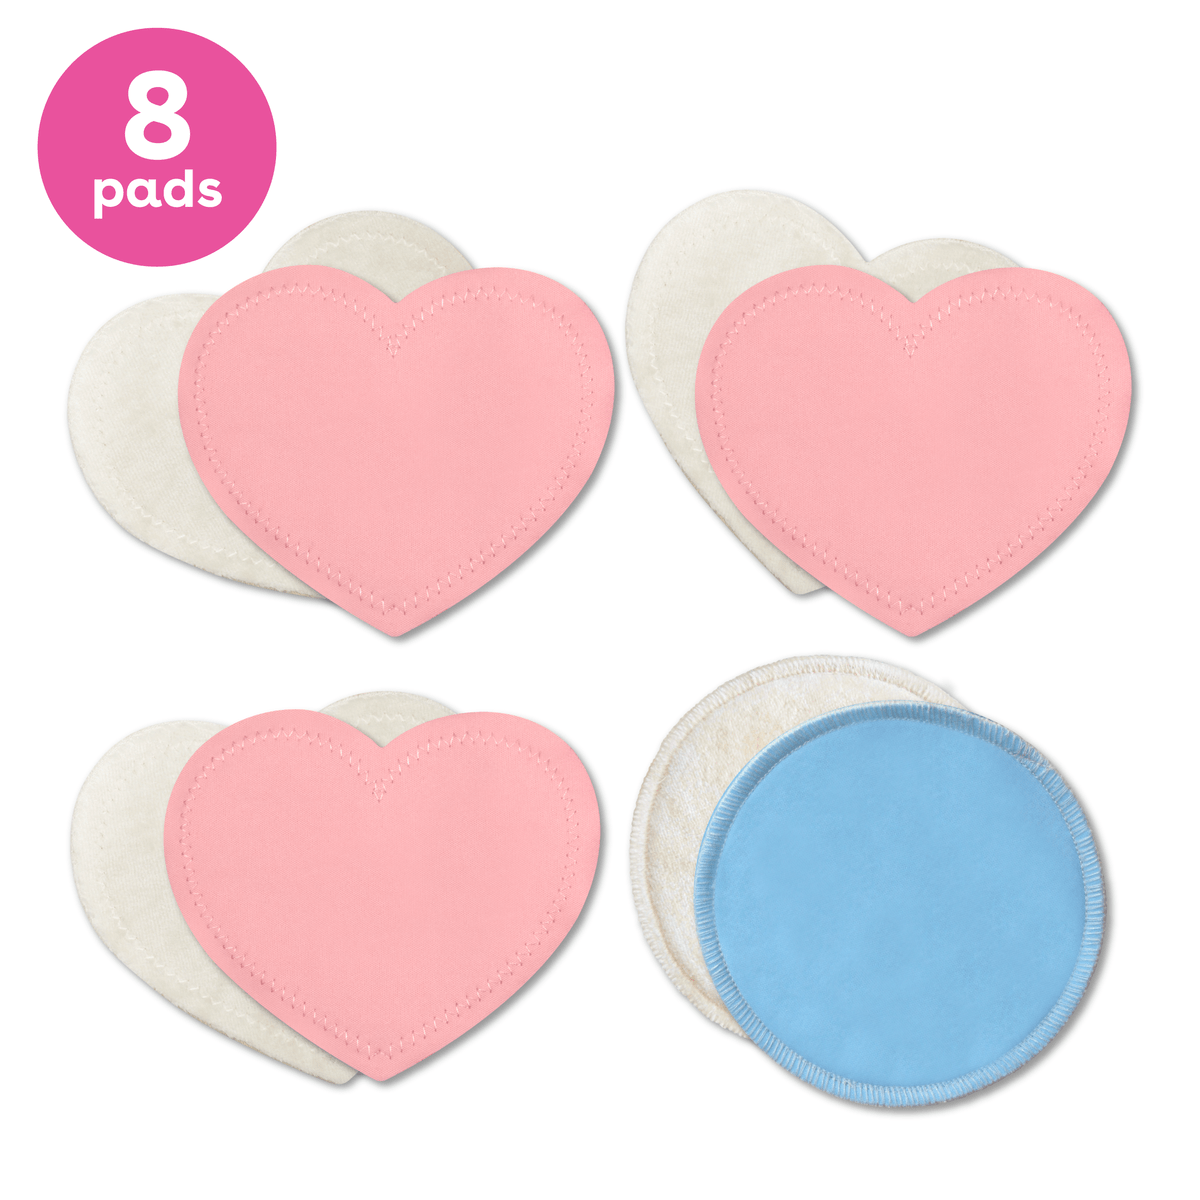 Reusable Nursing Pads for Breastfeeding by SuperBottoms